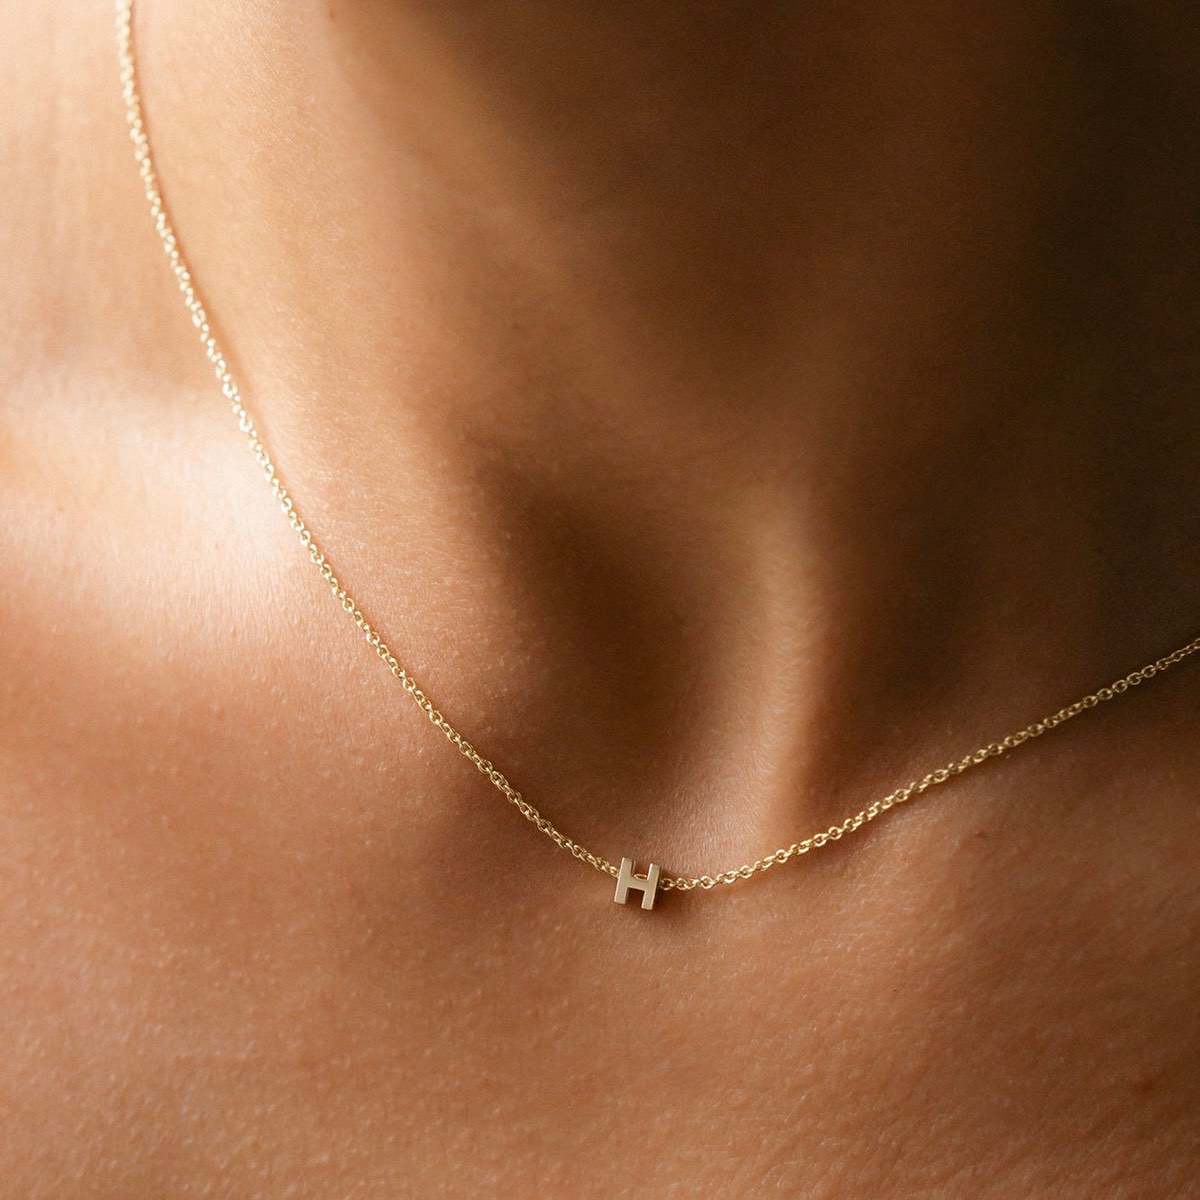 Hand finished solid gold letter necklace: Close up of a model wearing our beautiful 9ct yellow gold Tiny Letter H Charm Necklace with a 40cm cable chain